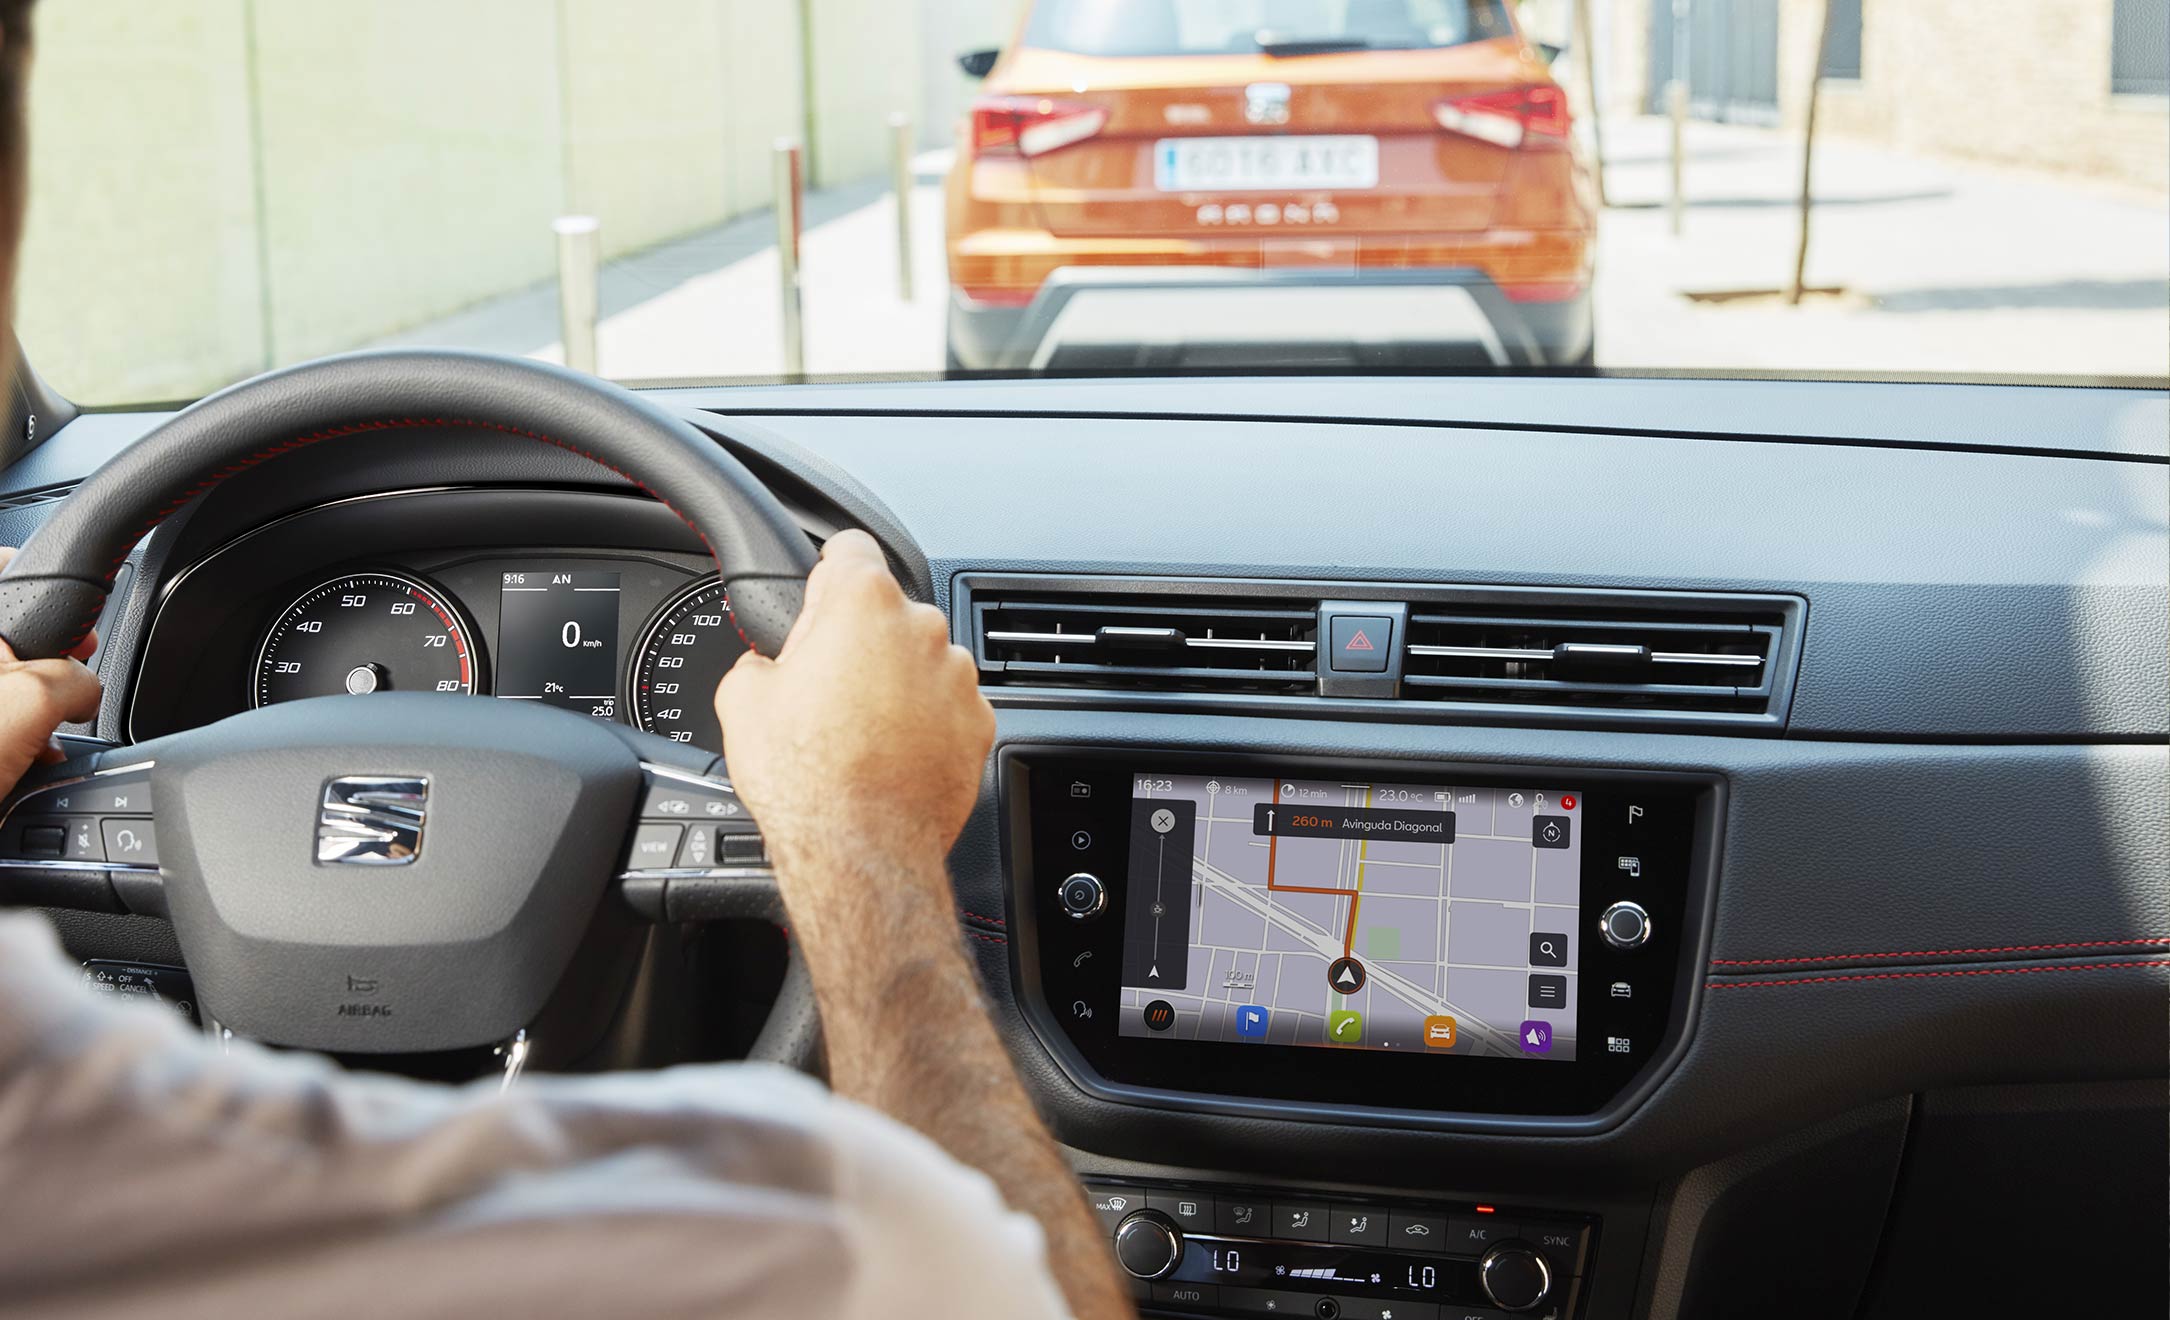 SEAT Arona infotainment services connect to applemusic and tidal